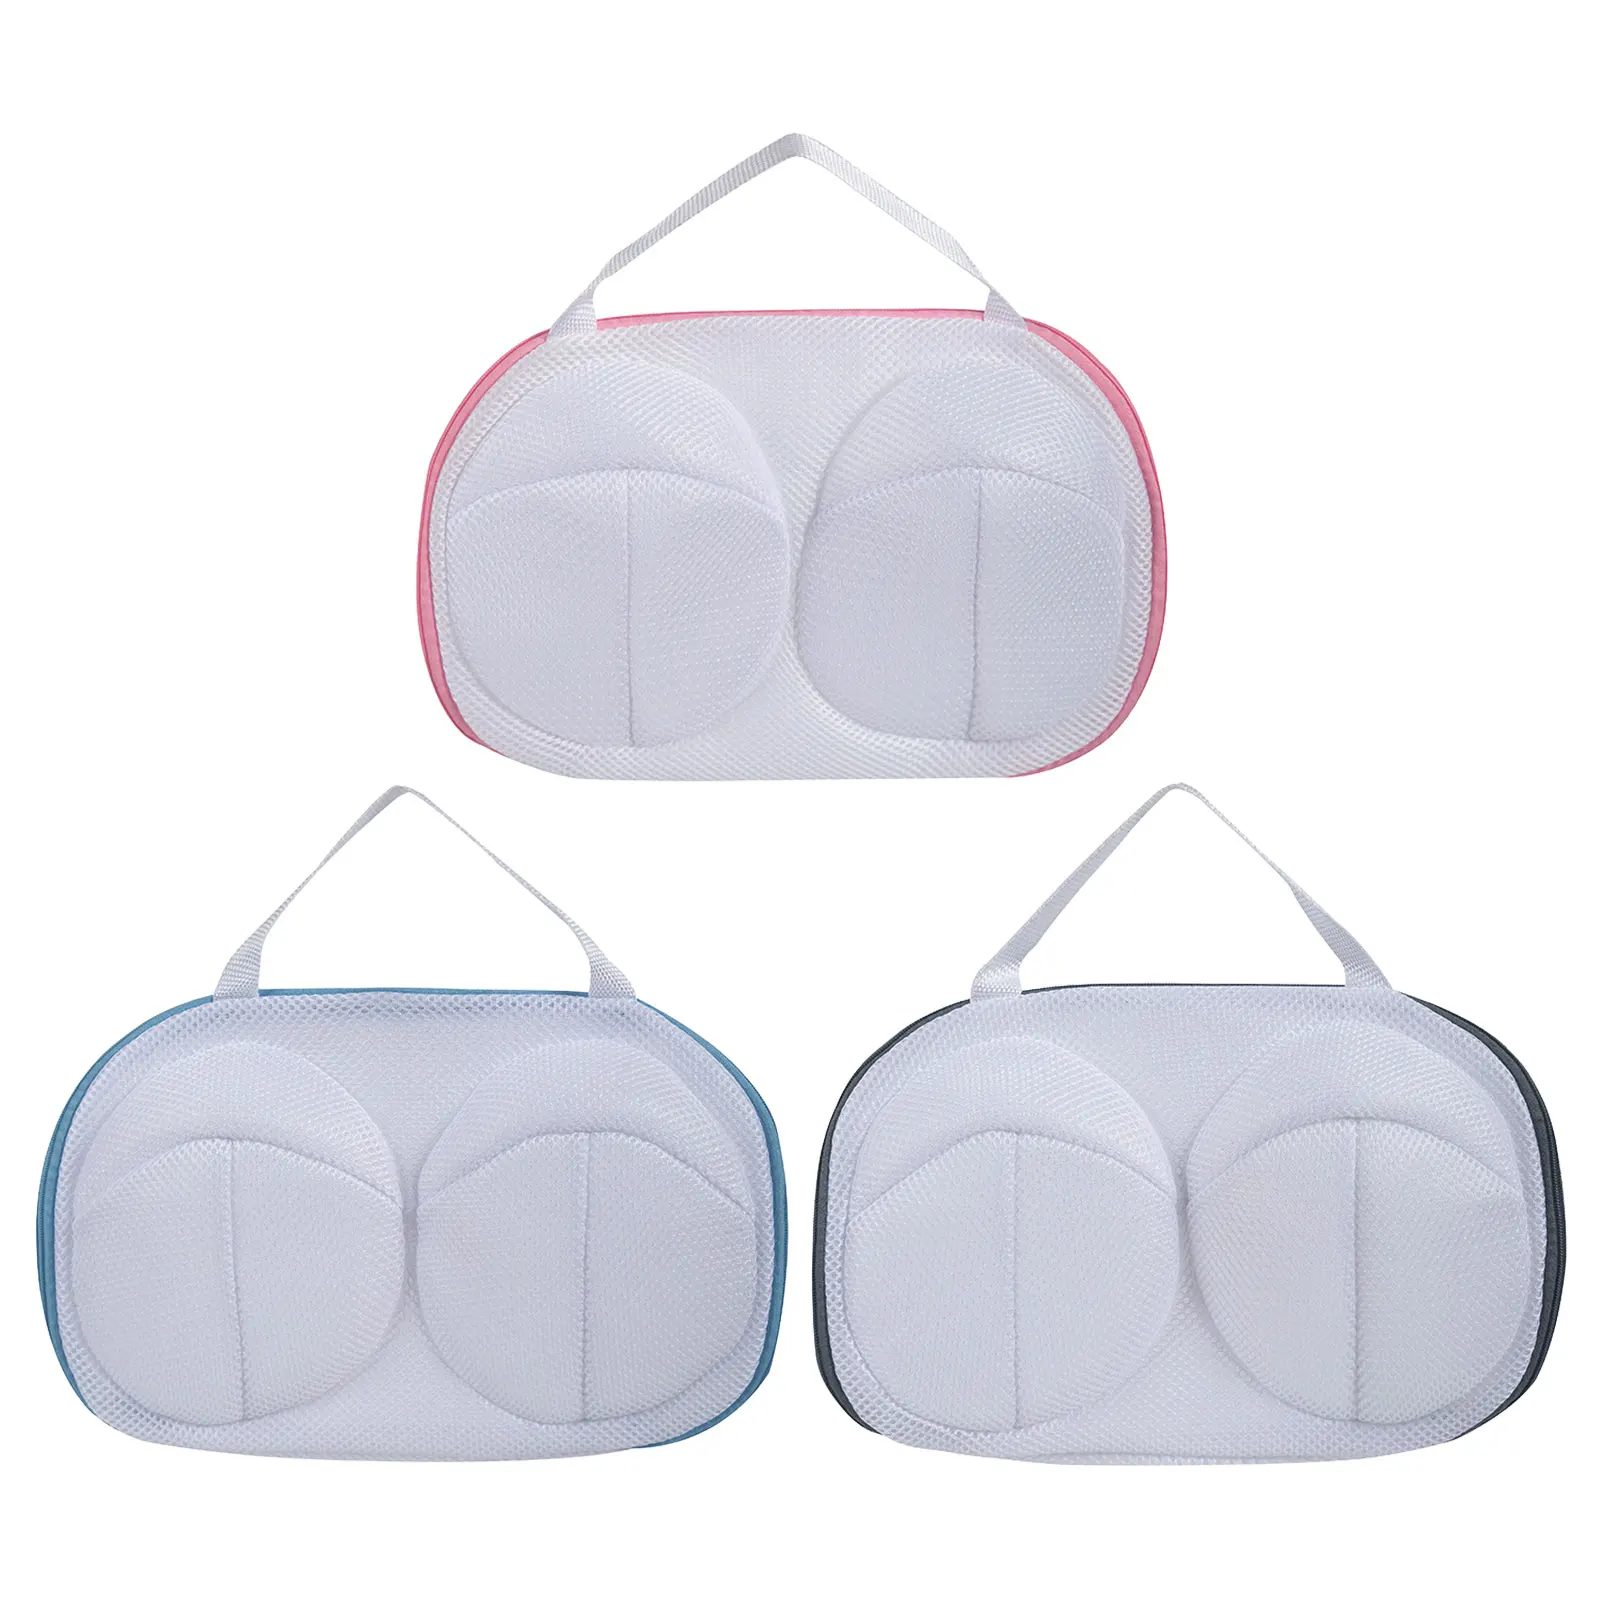 

Bra Washing Bags For Laundry Polyester Mesh Wash Bag Anti-Deformation Fits A-D Cup Underwear Lingerie Bags For Washing Machine